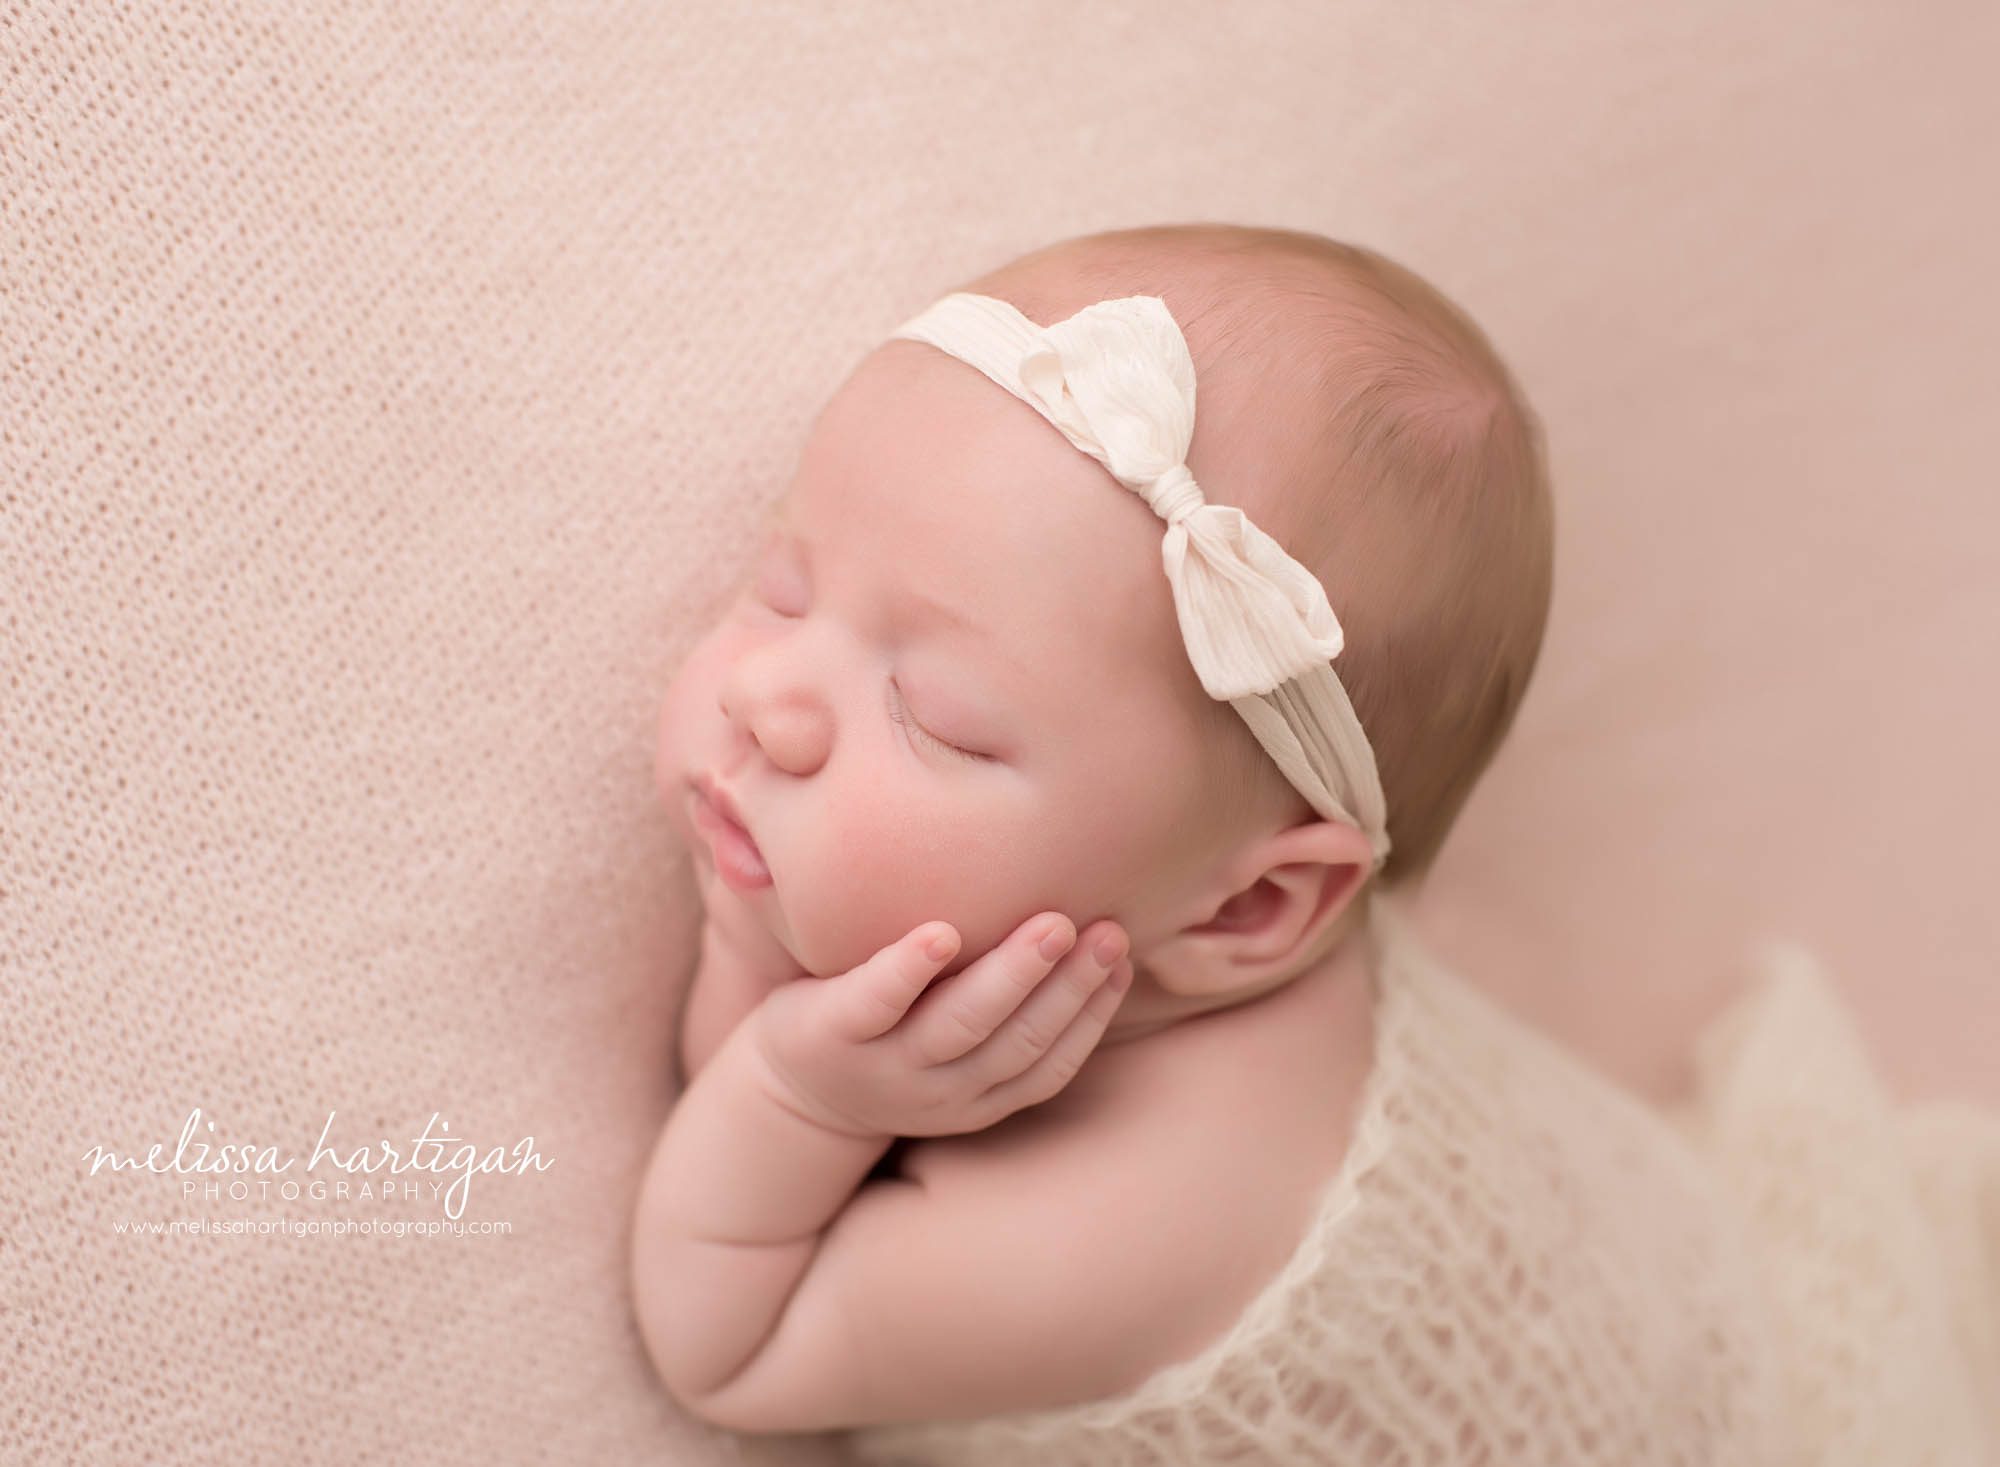 newborn baby girl posed with hands under cheeks laying on her side wearing cream bow headband